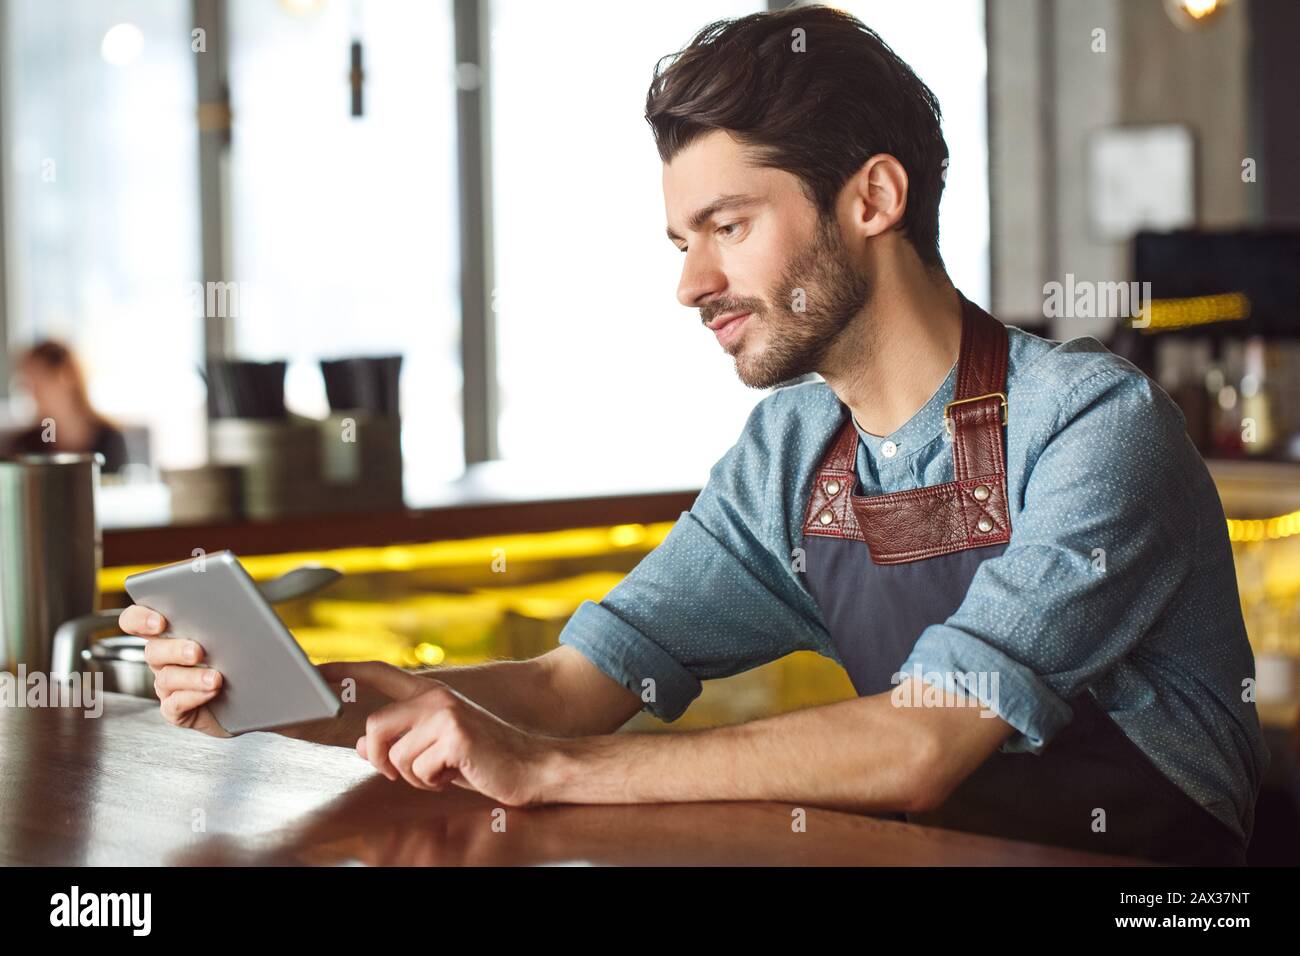 Professional Occupation. Bartender leaning on counter playing game on digital tablet joyful Stock Photo